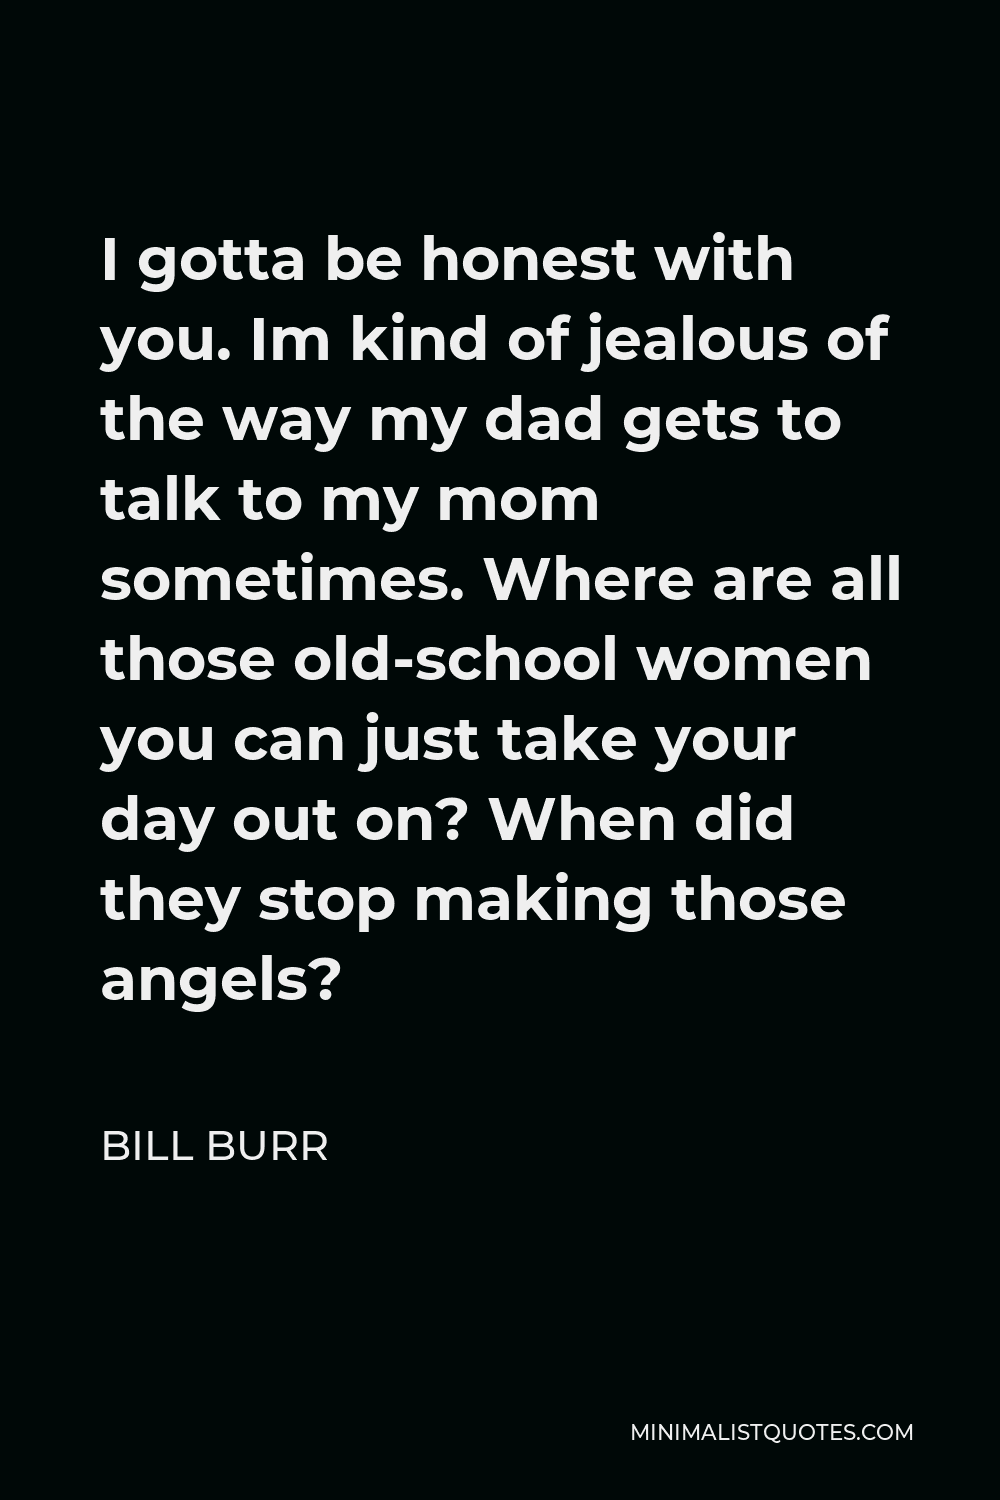 Bill Burr Quote - I gotta be honest with you. Im kind of jealous of the way my dad gets to talk to my mom sometimes. Where are all those old-school women you can just take your day out on? When did they stop making those angels?